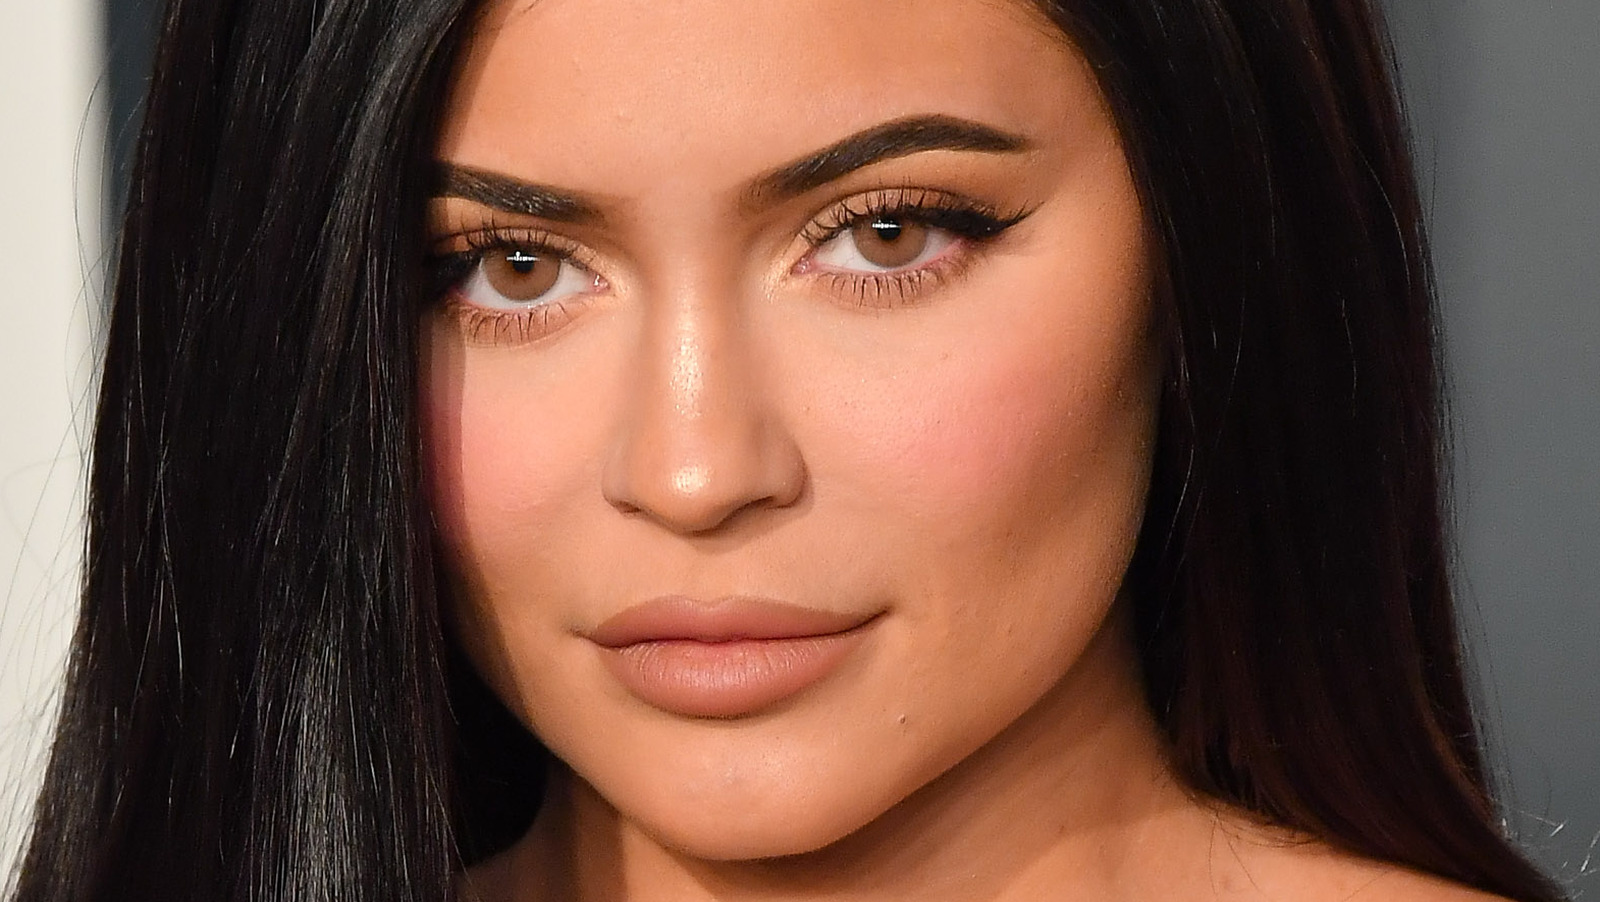 From Kylie Skin to Cannes: Social Media Has Their Say